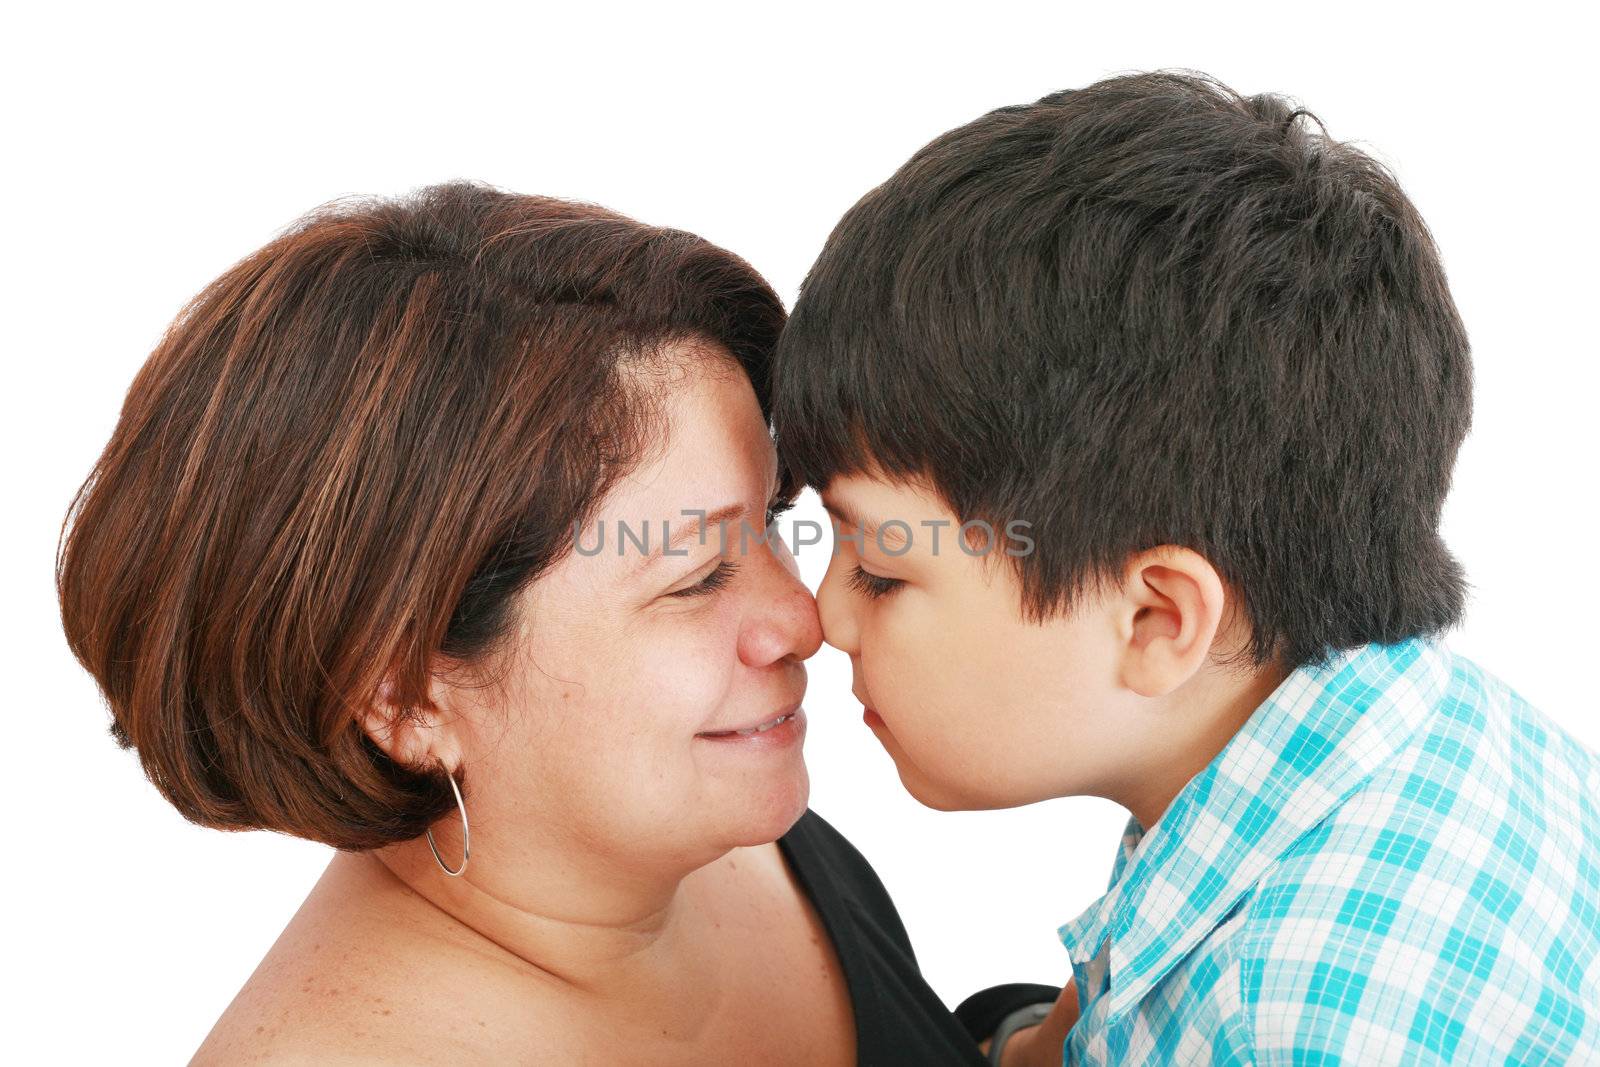 mother and son about to kiss - isolated over white